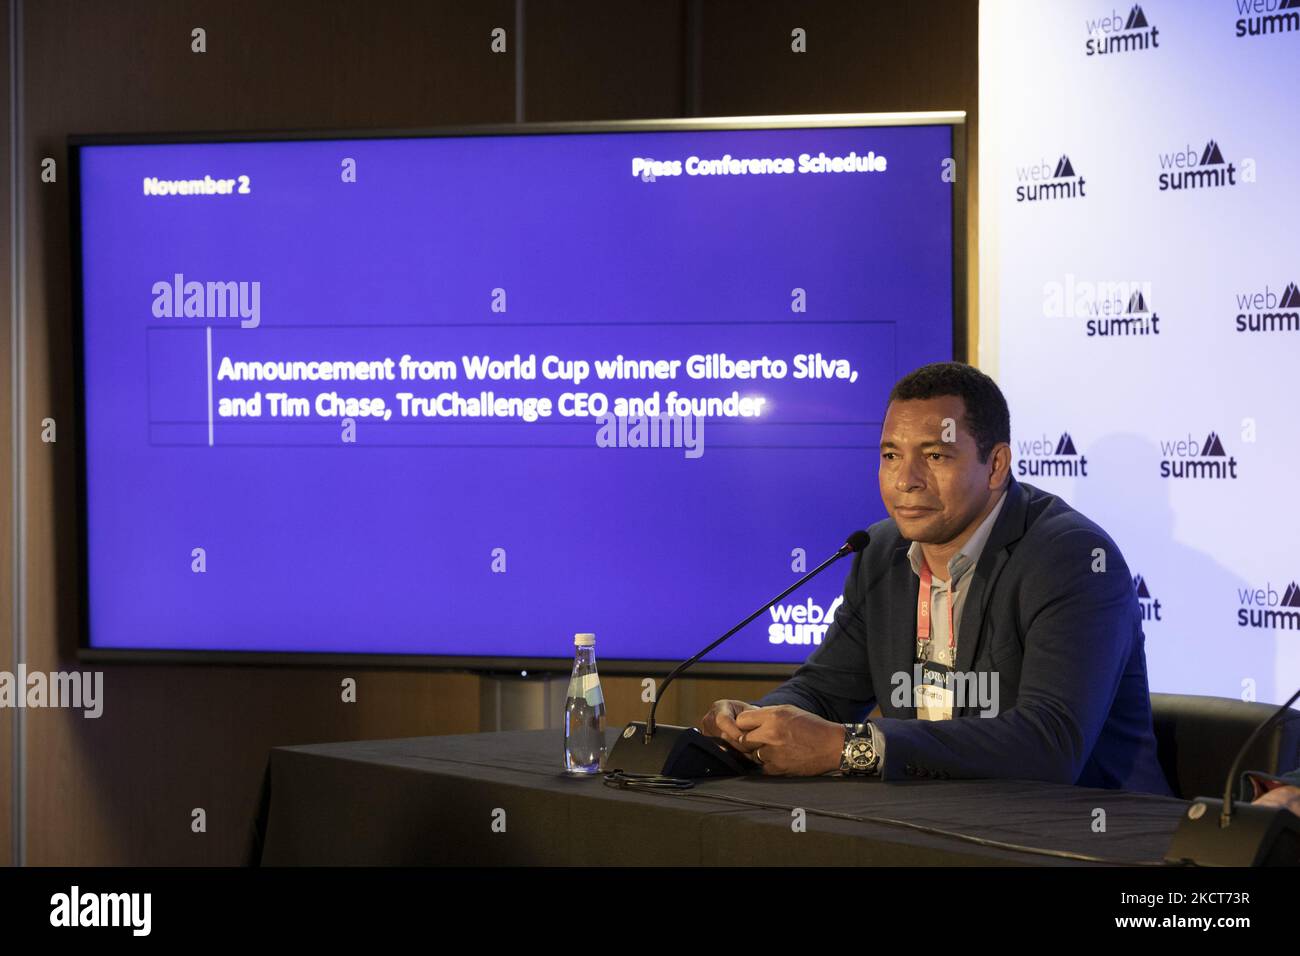 World Cup winner Gilberto Silva,Founder and CEO Truchallenge Tim Chase in a press conference during second day of Web Summit 2021 in Lisbon, Portugal on November 2, 2021. (Photo by Rita Franca/NurPhoto) Stock Photo